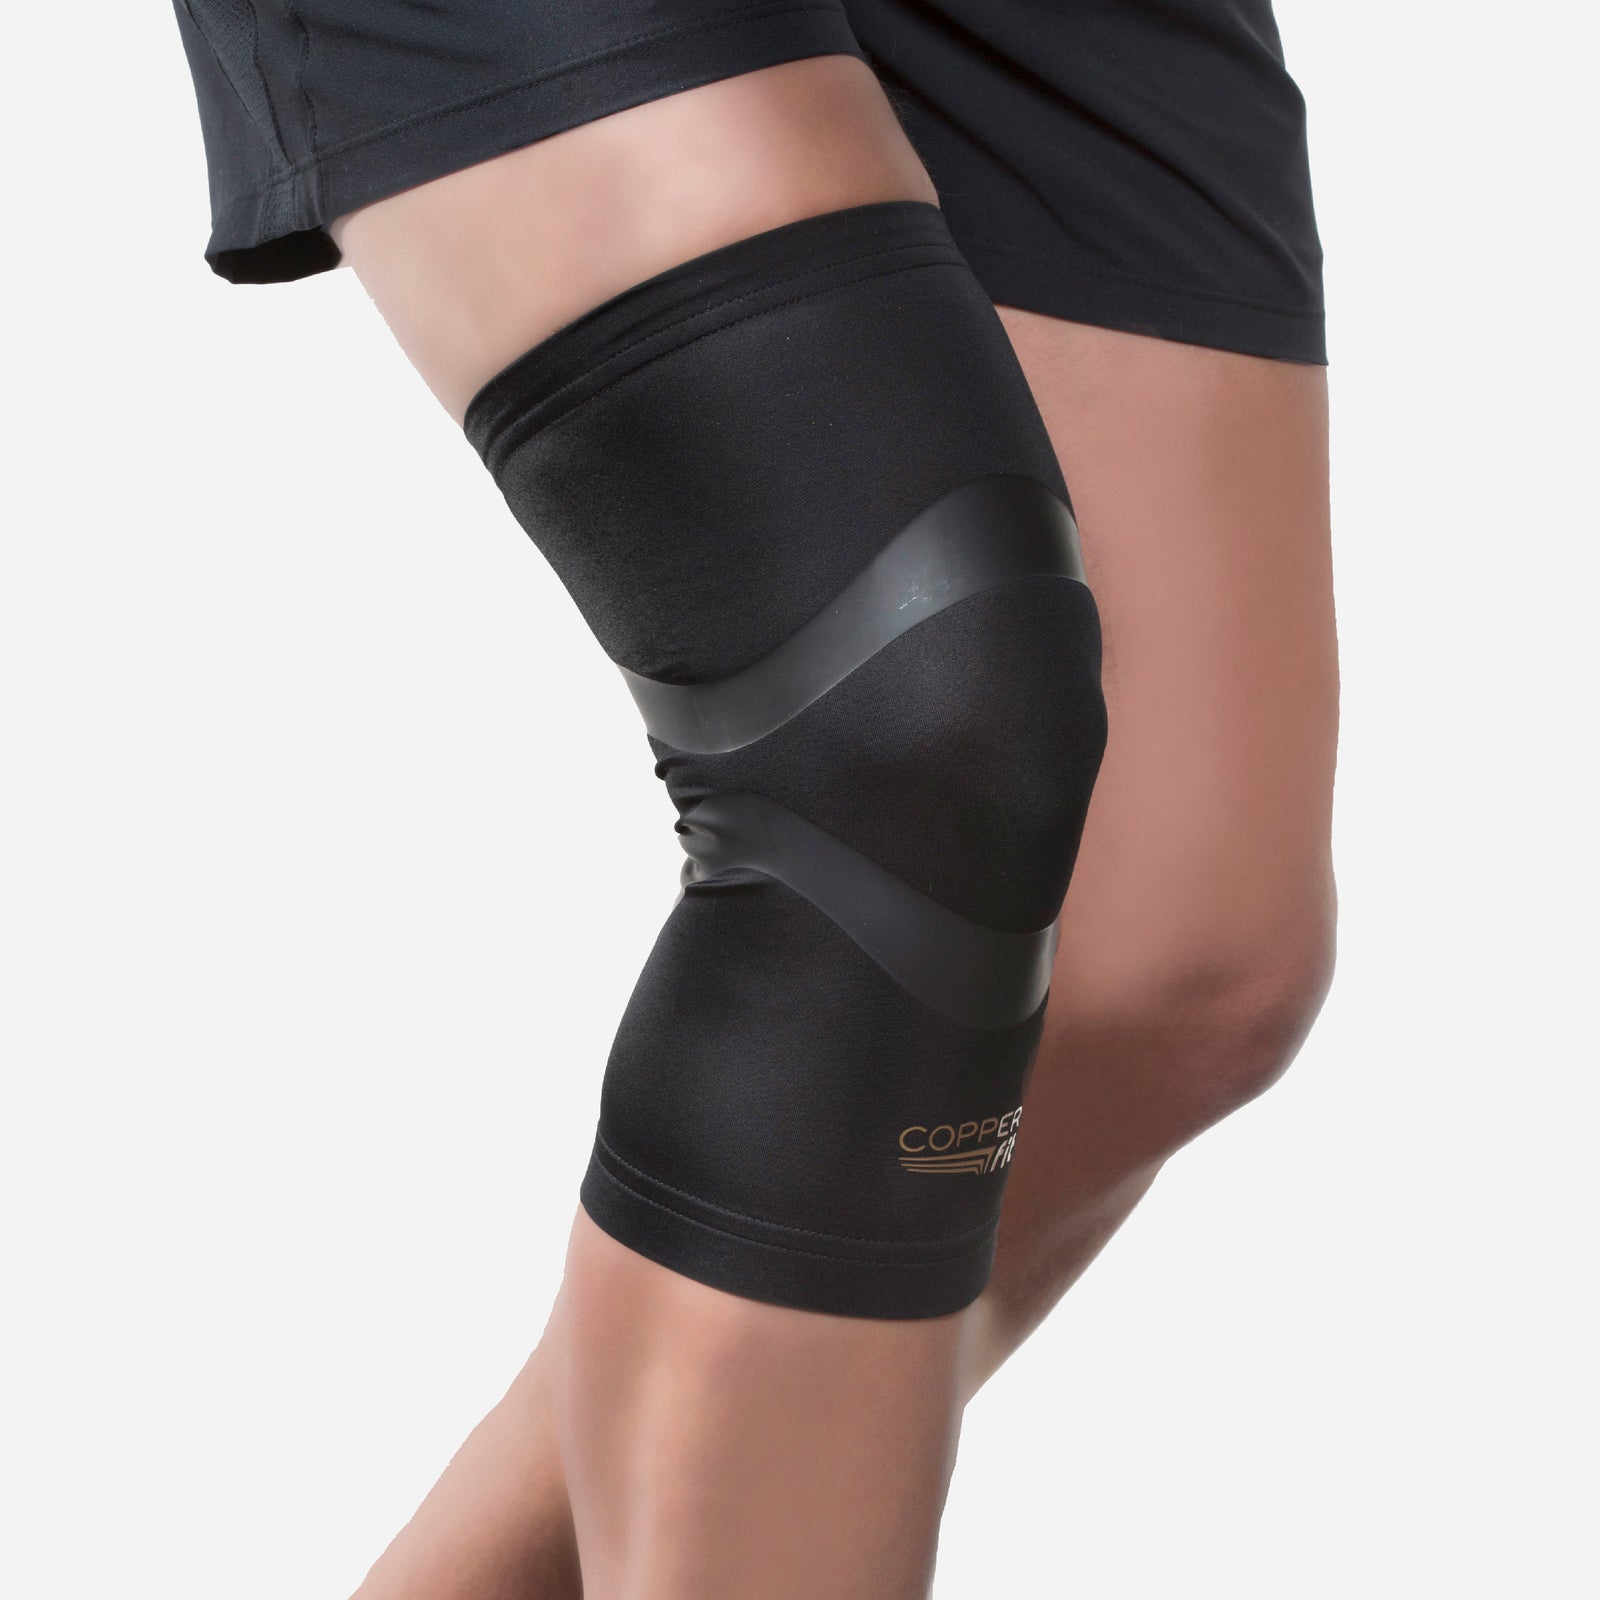 Knee Brace For Arthritis Pain And Support - Copper Knee Sleeve For